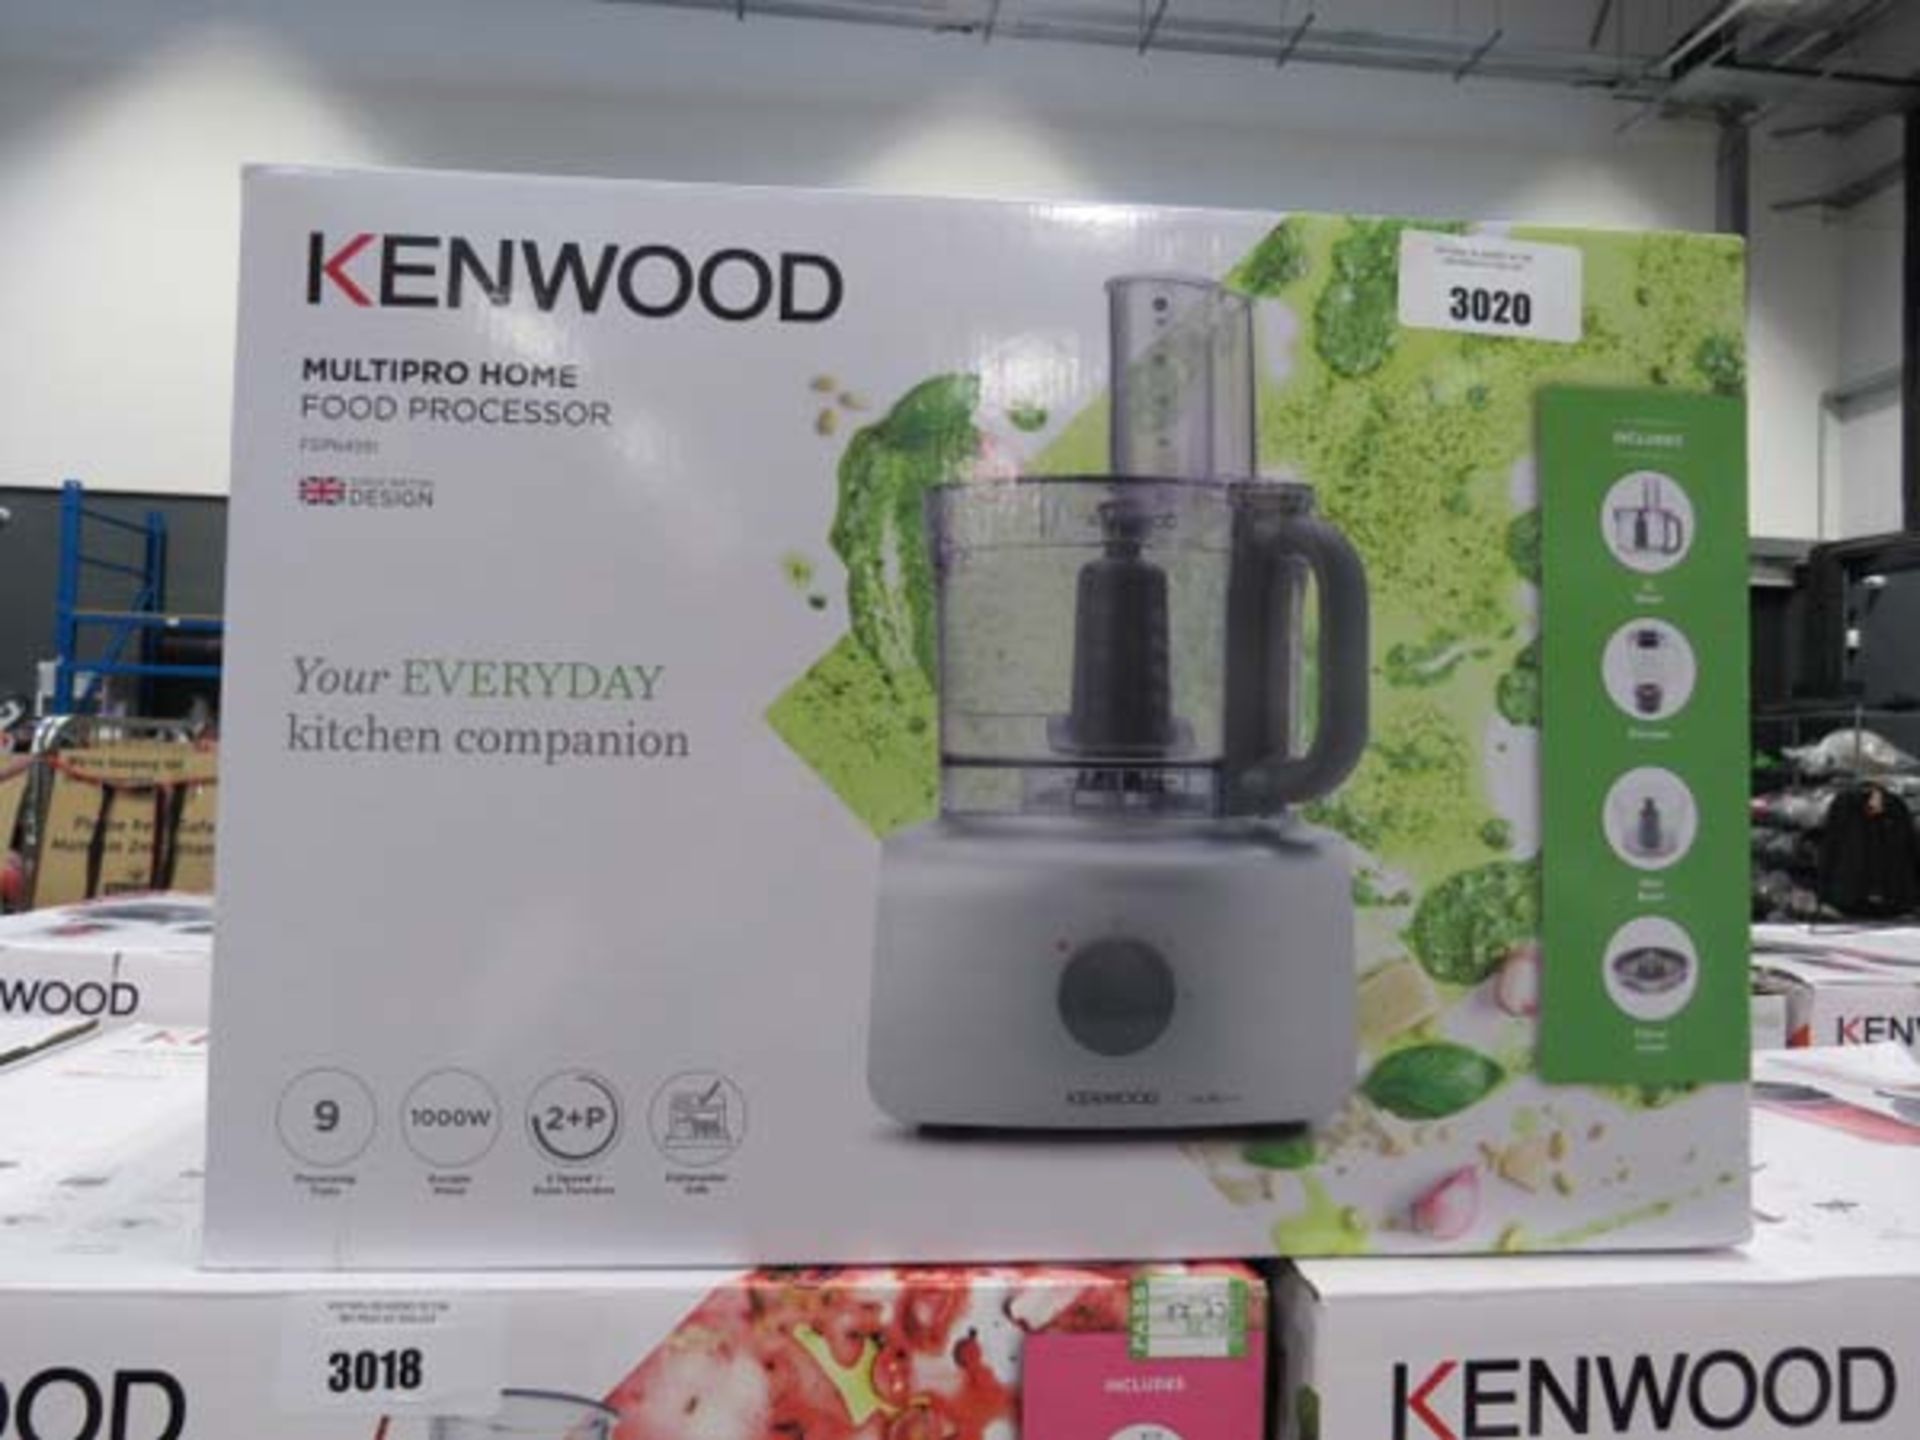 Boxed Kenwood MultiPro compact plus food processor